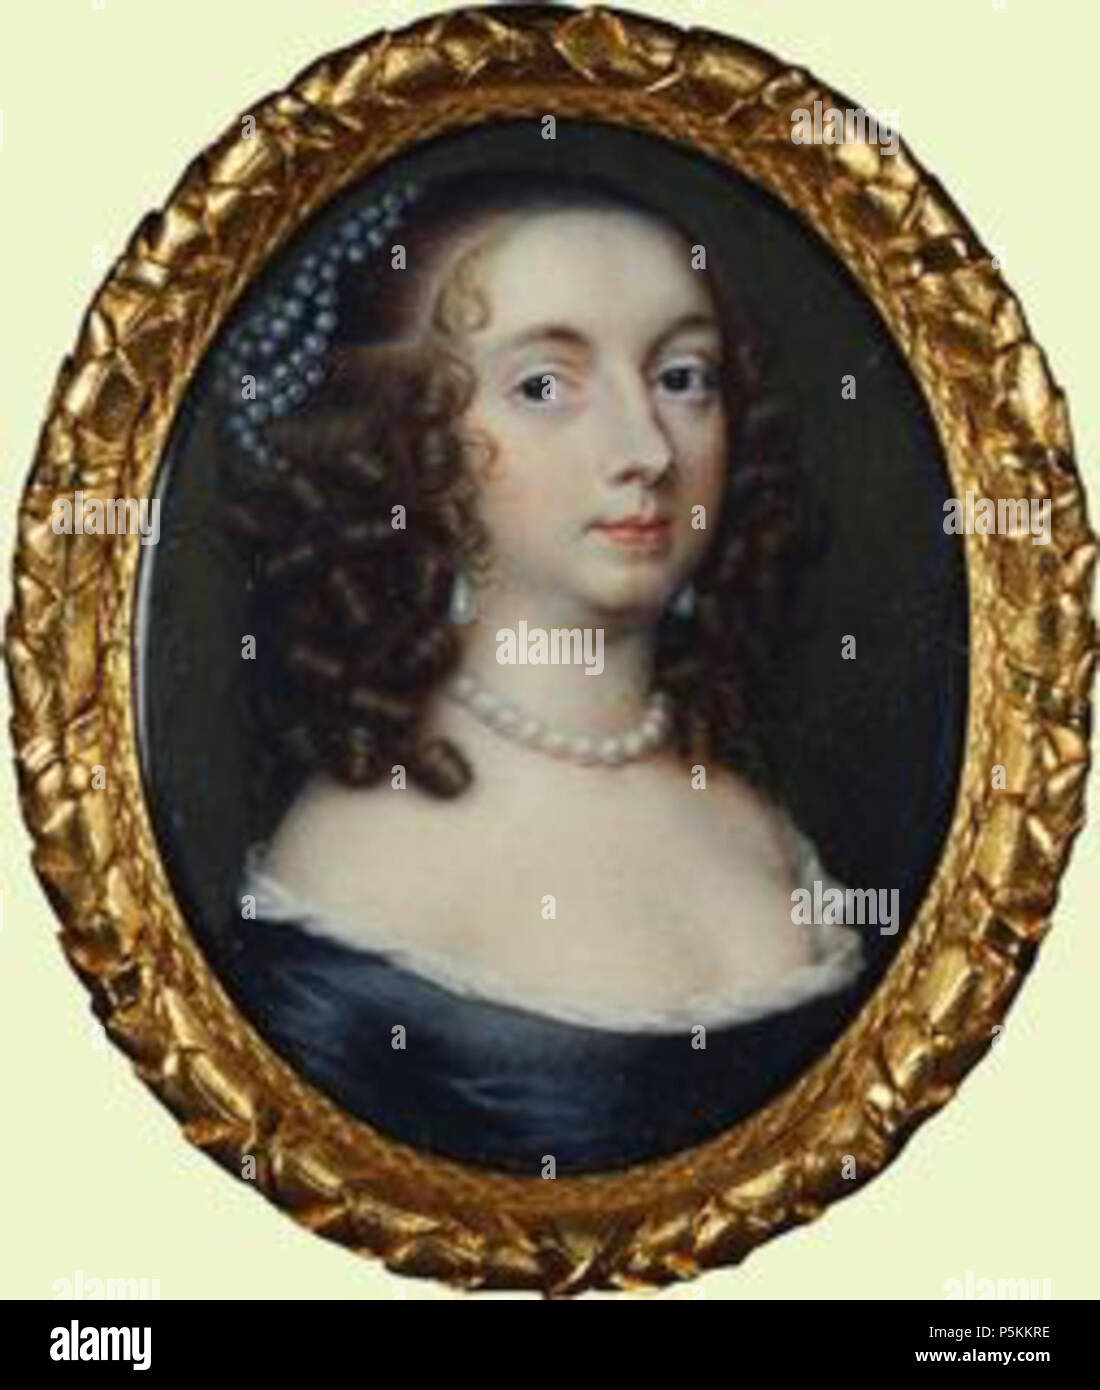 N/A. English: Hon. Anne de Vere was born in 1618 at The Netherlands. She was the daughter of Horatio de Vere, 1st and last Baron Vere of Tilbury, and Mary Tracy. She married Thomas Fairfax, 3rd Lord Fairfax of Cameron, son of Ferdinando Fairfax, 2nd Lord Fairfax of Cameron and Lady Mary Sheffield, on 20 June 1637. She died on 16 October 1665 at Nun Appleton, Bolton Percy, Yorkshire, England. Child of Hon. Anne de Vere and Thomas Fairfax, 3rd Lord Fairfax of Cameron * Hon. Mary Fairfax1 b. 30 Jul 1638, d. 20 Oct 1704 . 30 September 2009. Lisby 105 Anne de Vere, Lady Fairfax Stock Photo